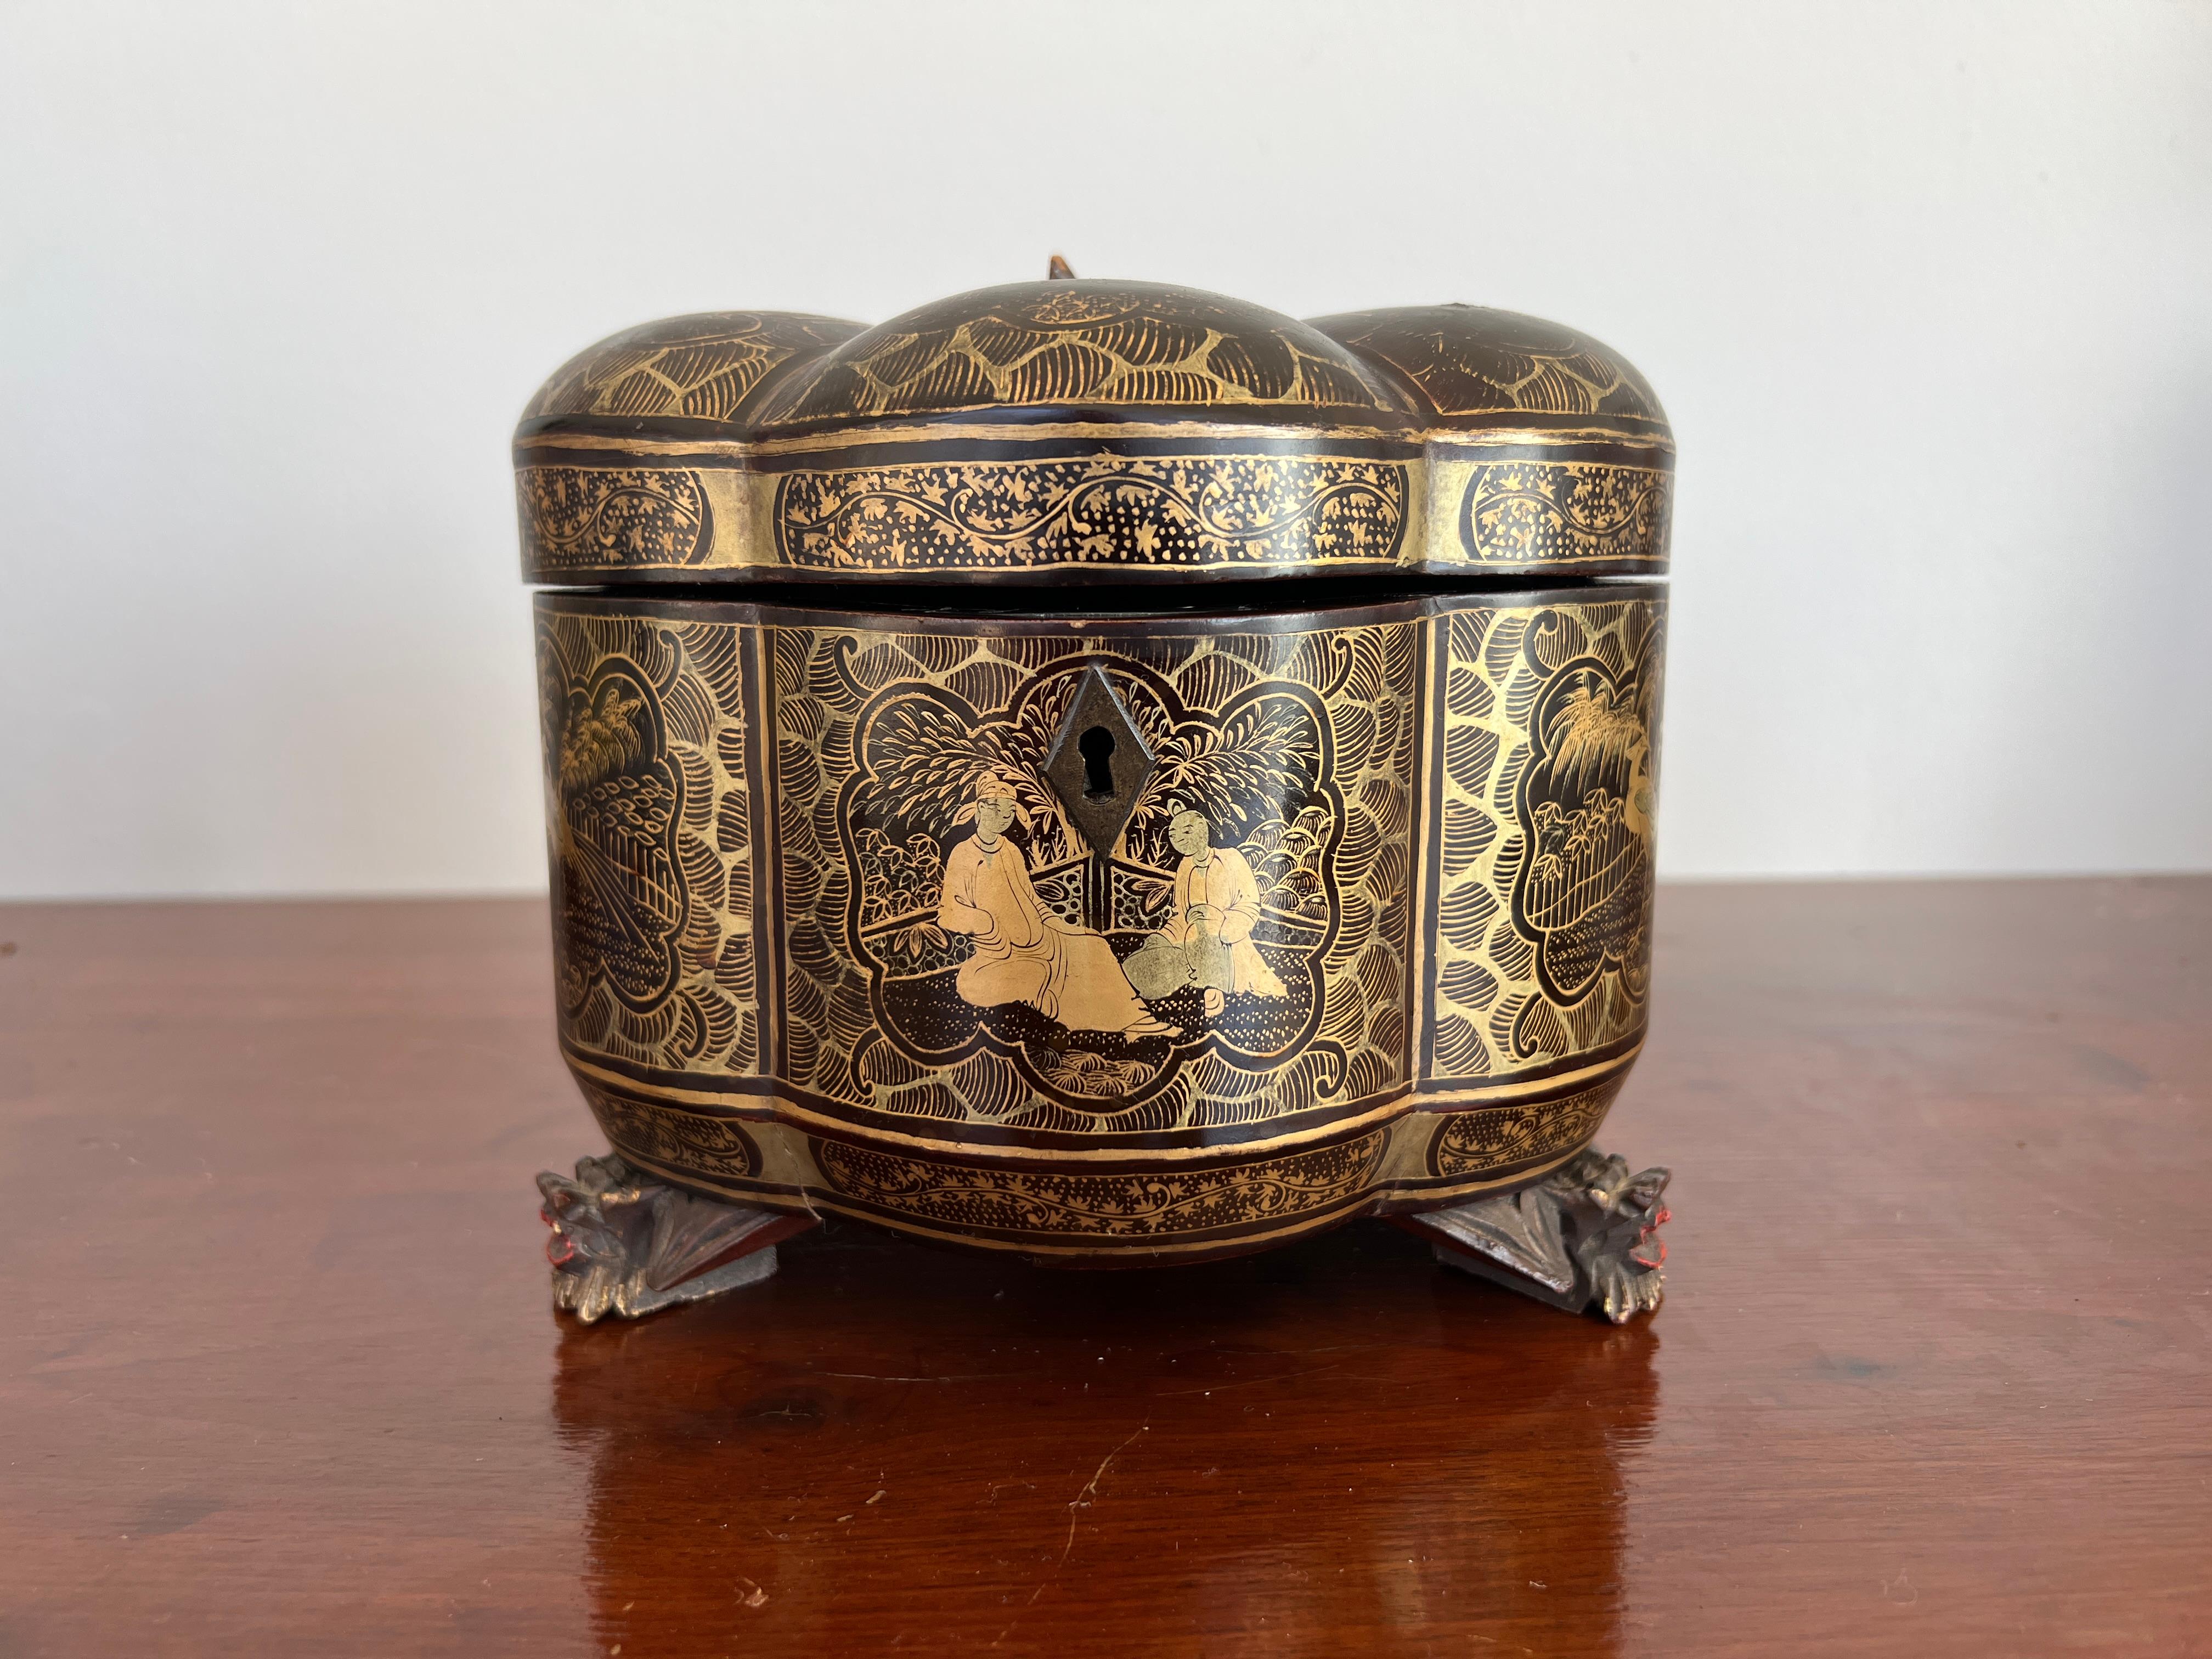 Chinese, 19th century.

Chinese lacquer and gilt decorated melon form tea caddy chest or box. The piece is heavily decorated with chinoiserie windows and supported by three giltwood carved dragon feet. Unfortunately missing the original pewter tea